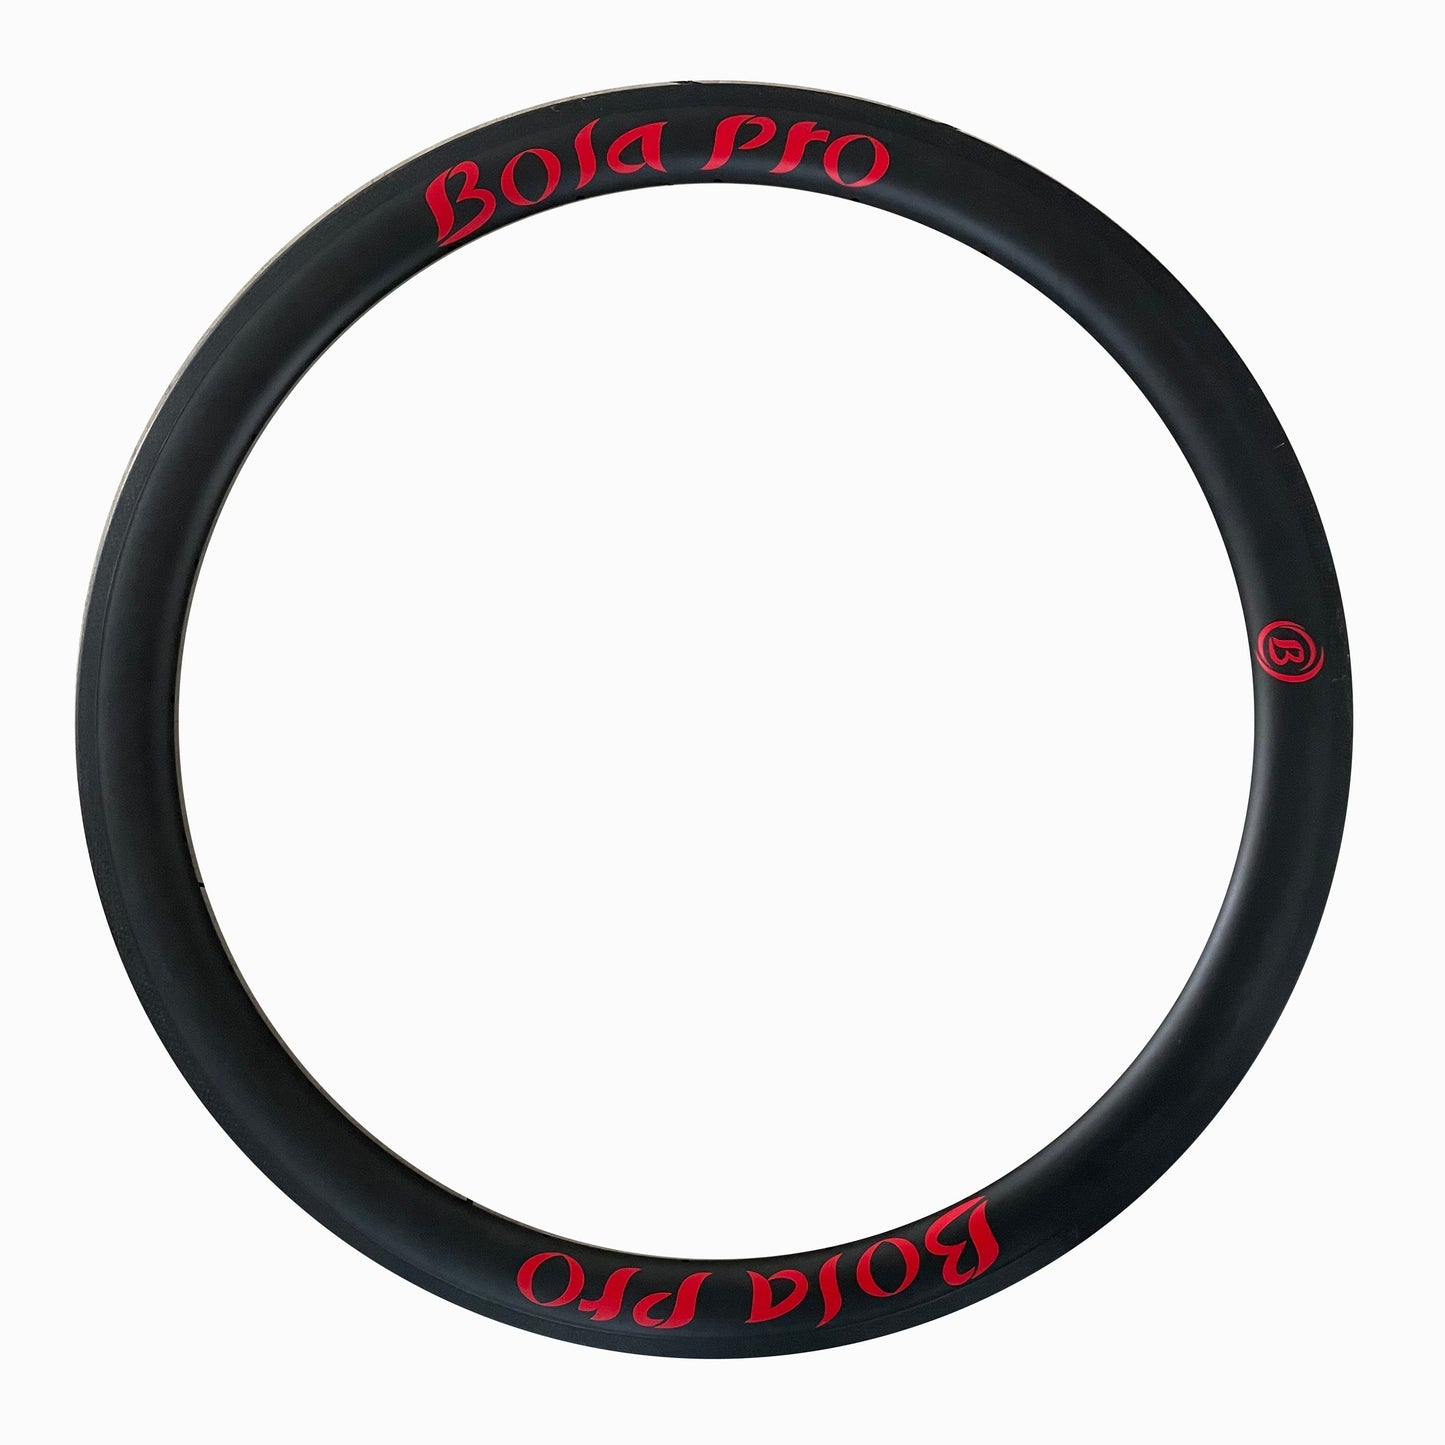 Tubeless  carbon rims 60mm profile  25mm wide for Disc Brake